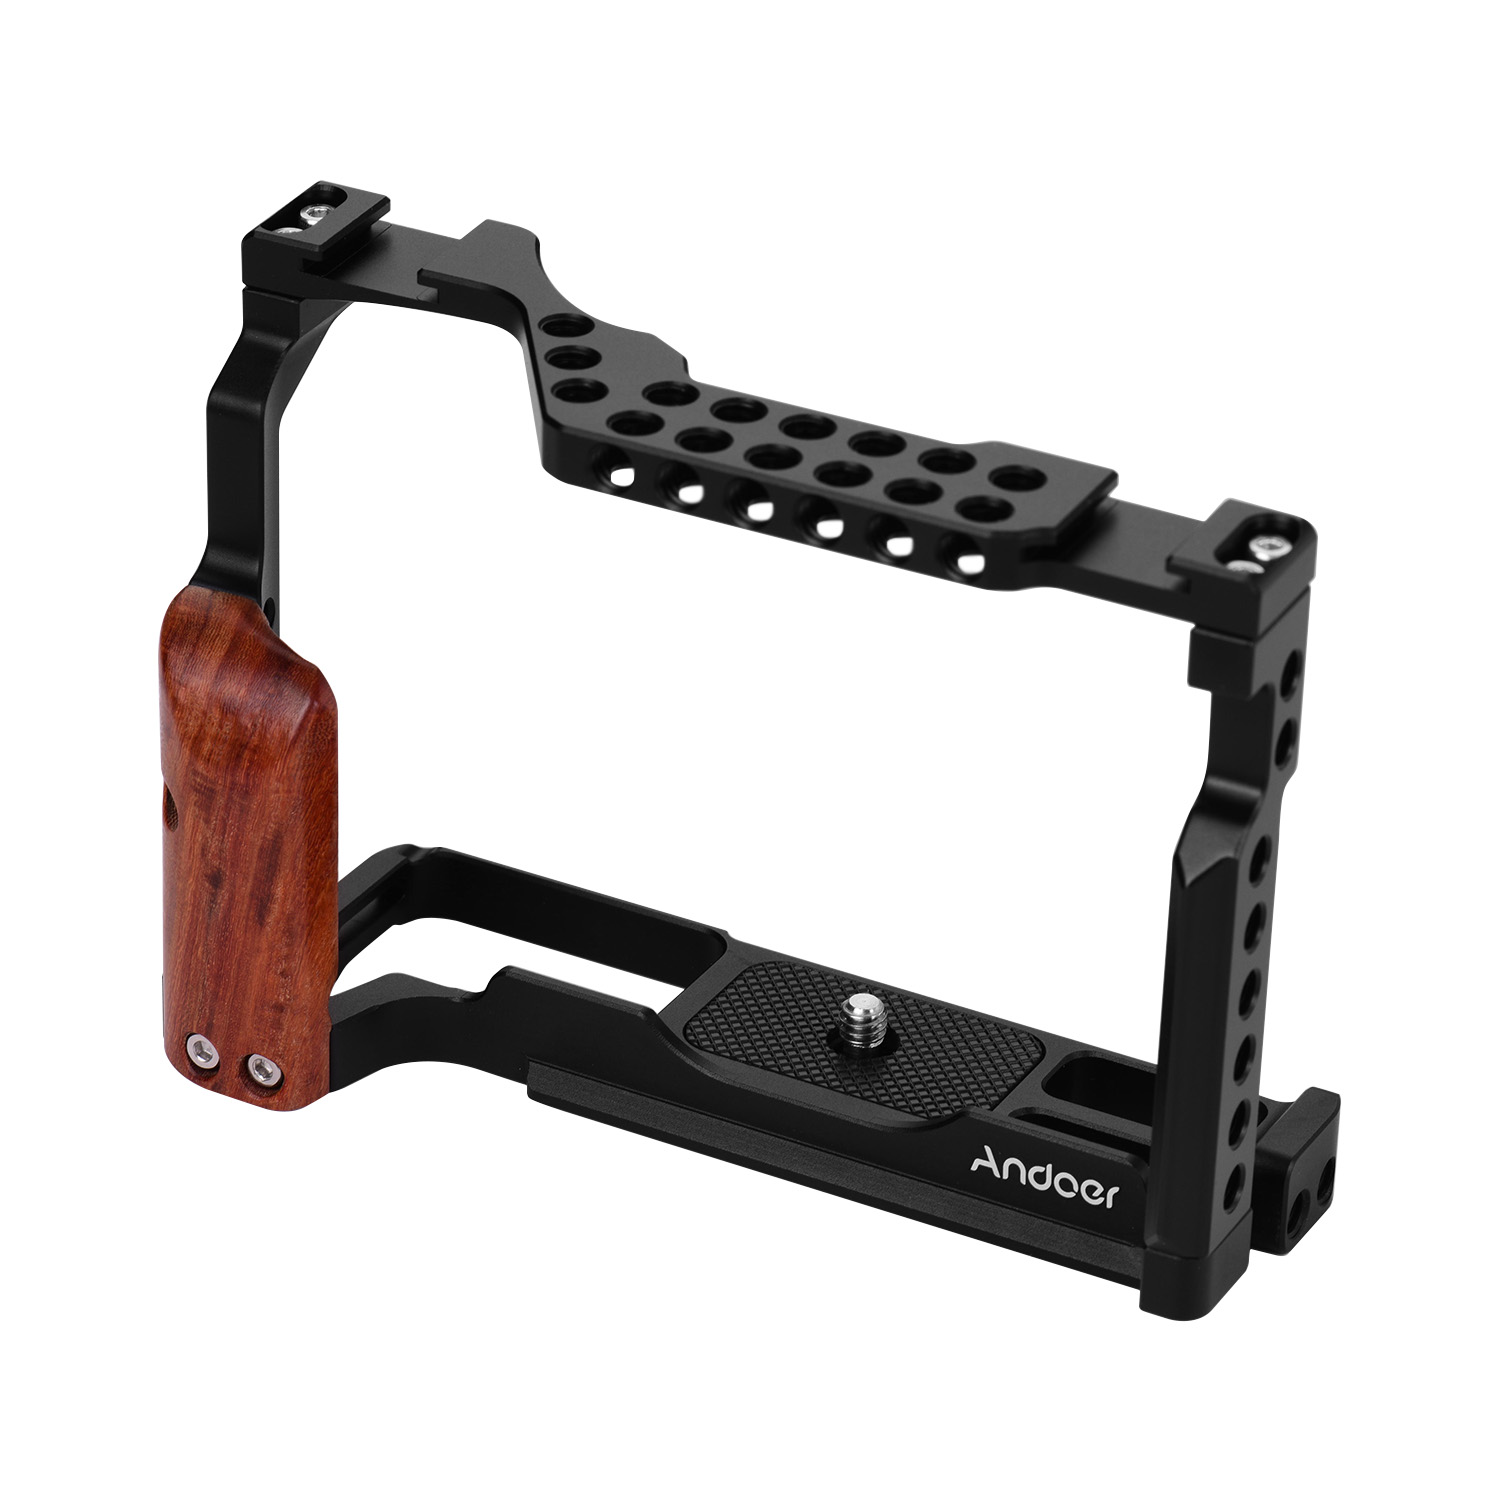 Andoer Aluminum Alloy Video Camera Cage with Dual Cold Shoe Mount Compatible with Fujifilm X-T3/X-T2